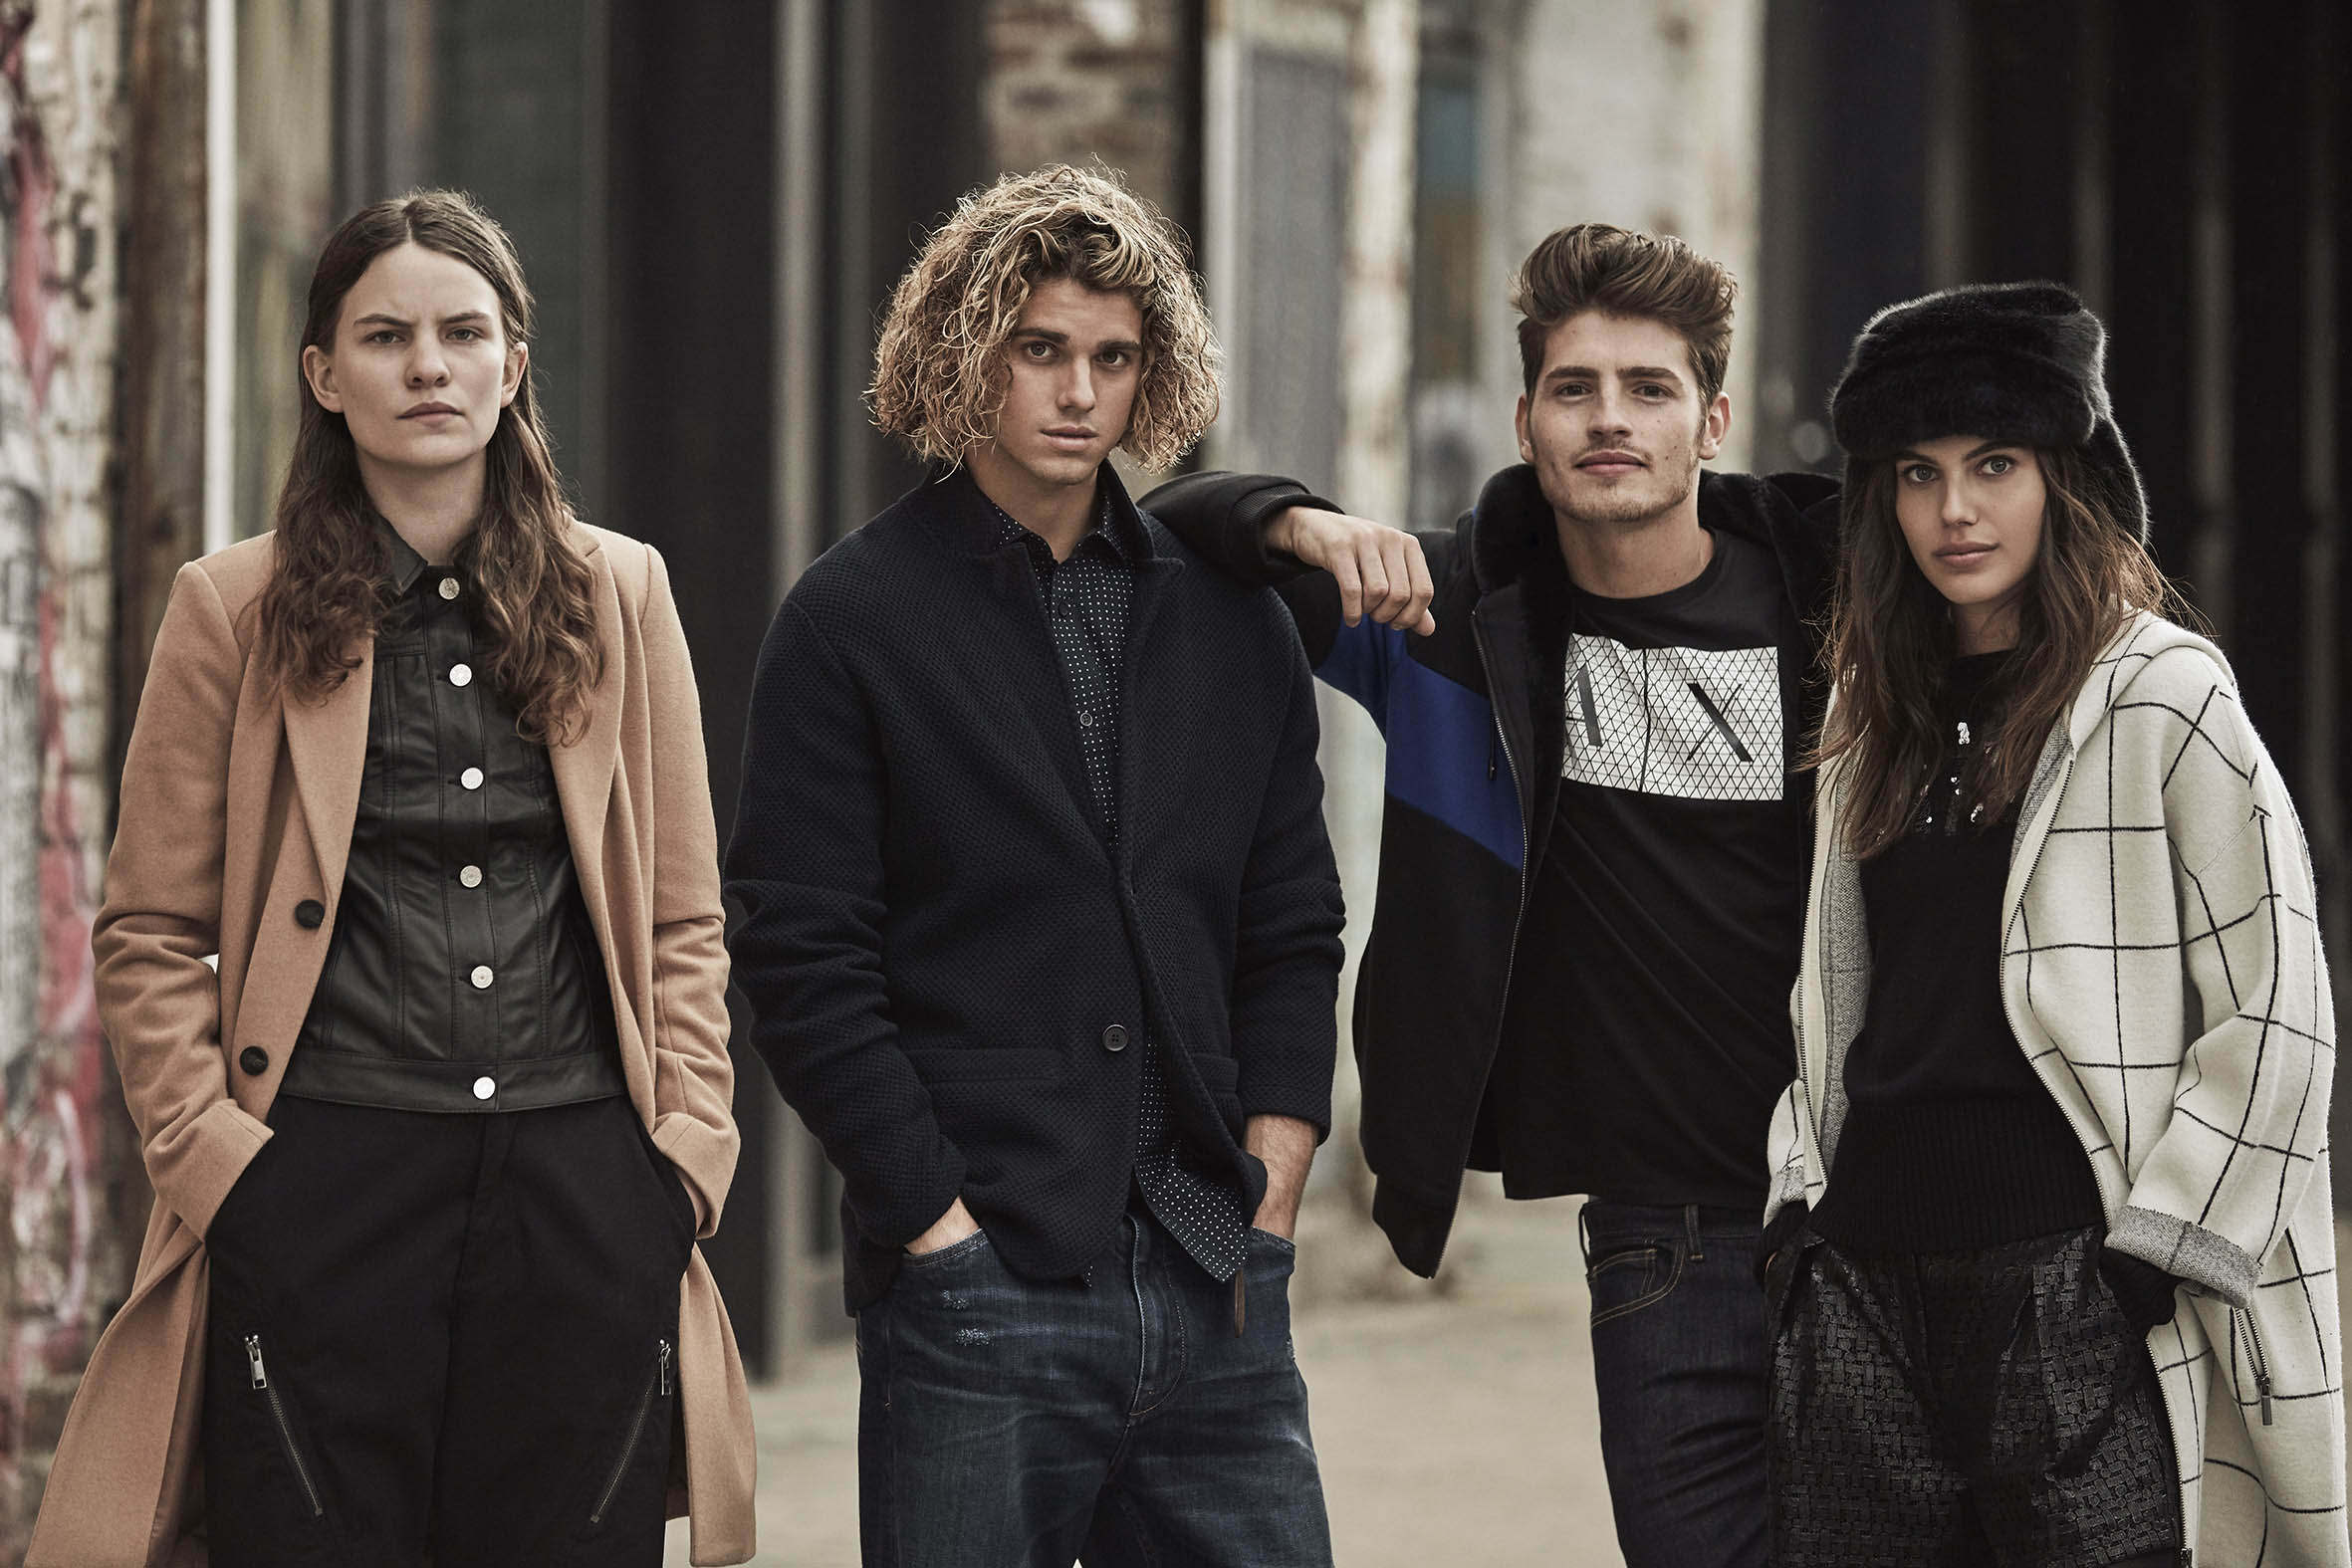 Eliot Sumner, Jay Alvarrez, and More Star in Armani Exchange Fall Campaign  - Daily Front Row